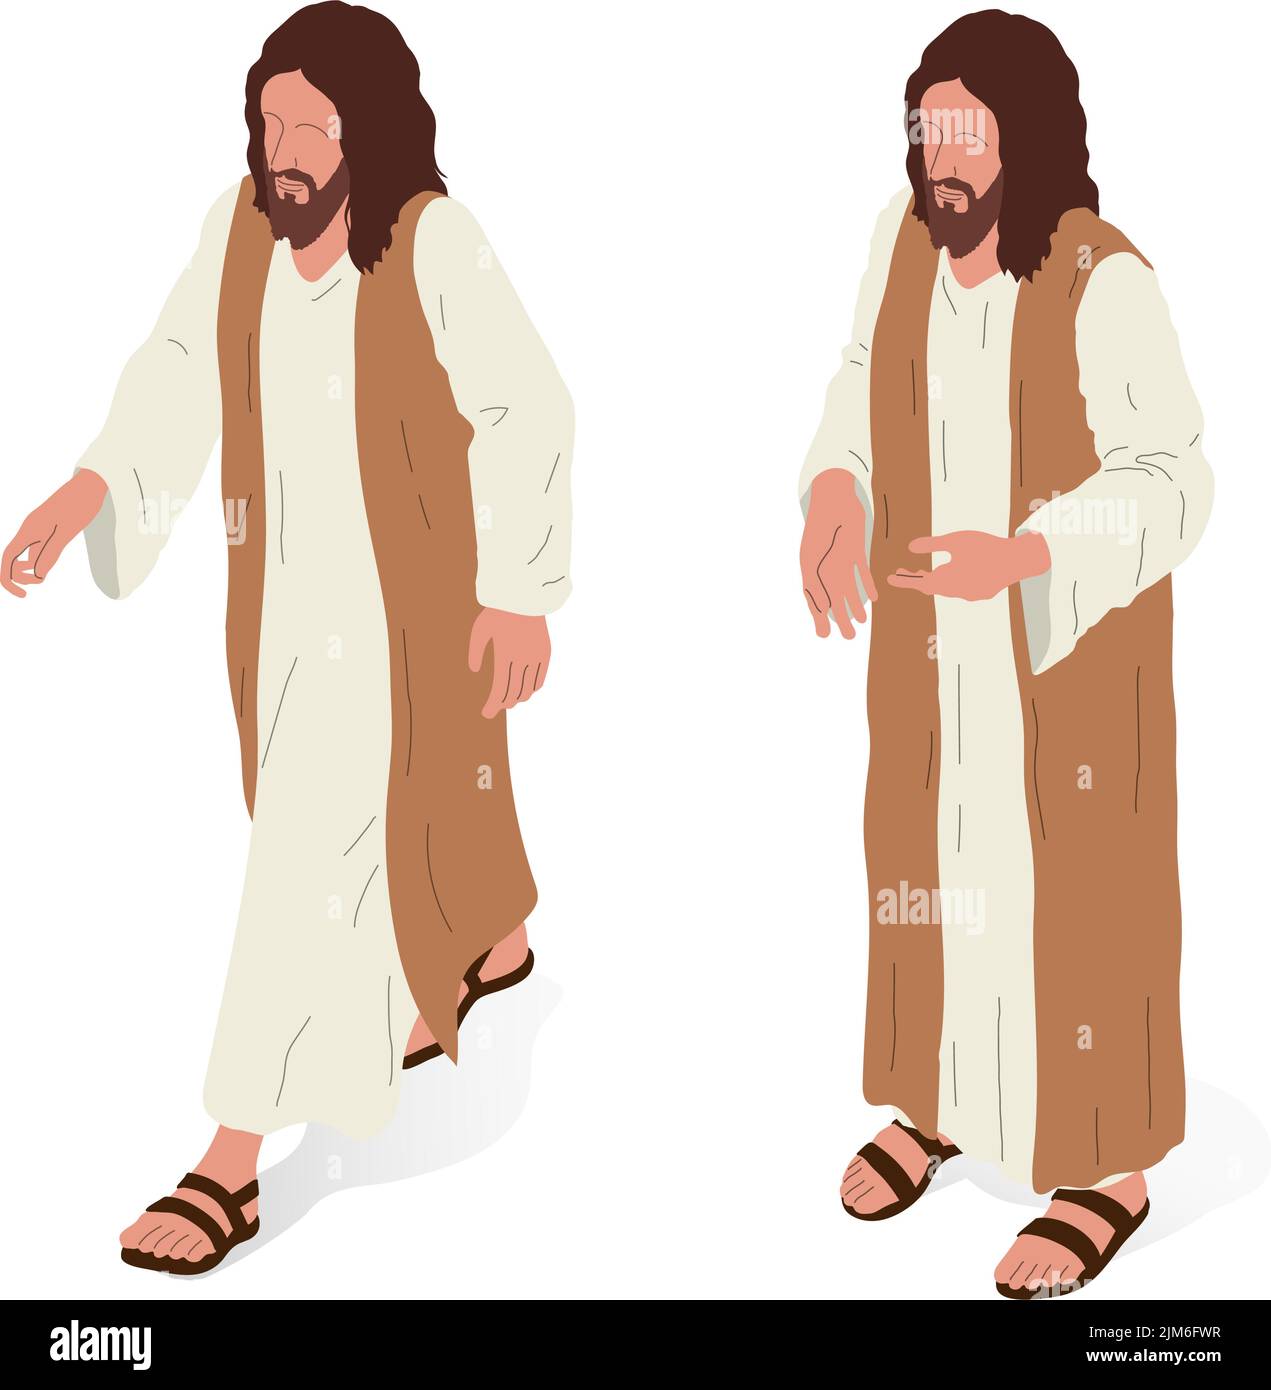 Jesus standing, front and side view. Isometric vector illustration, isolated figure. Stock Vector